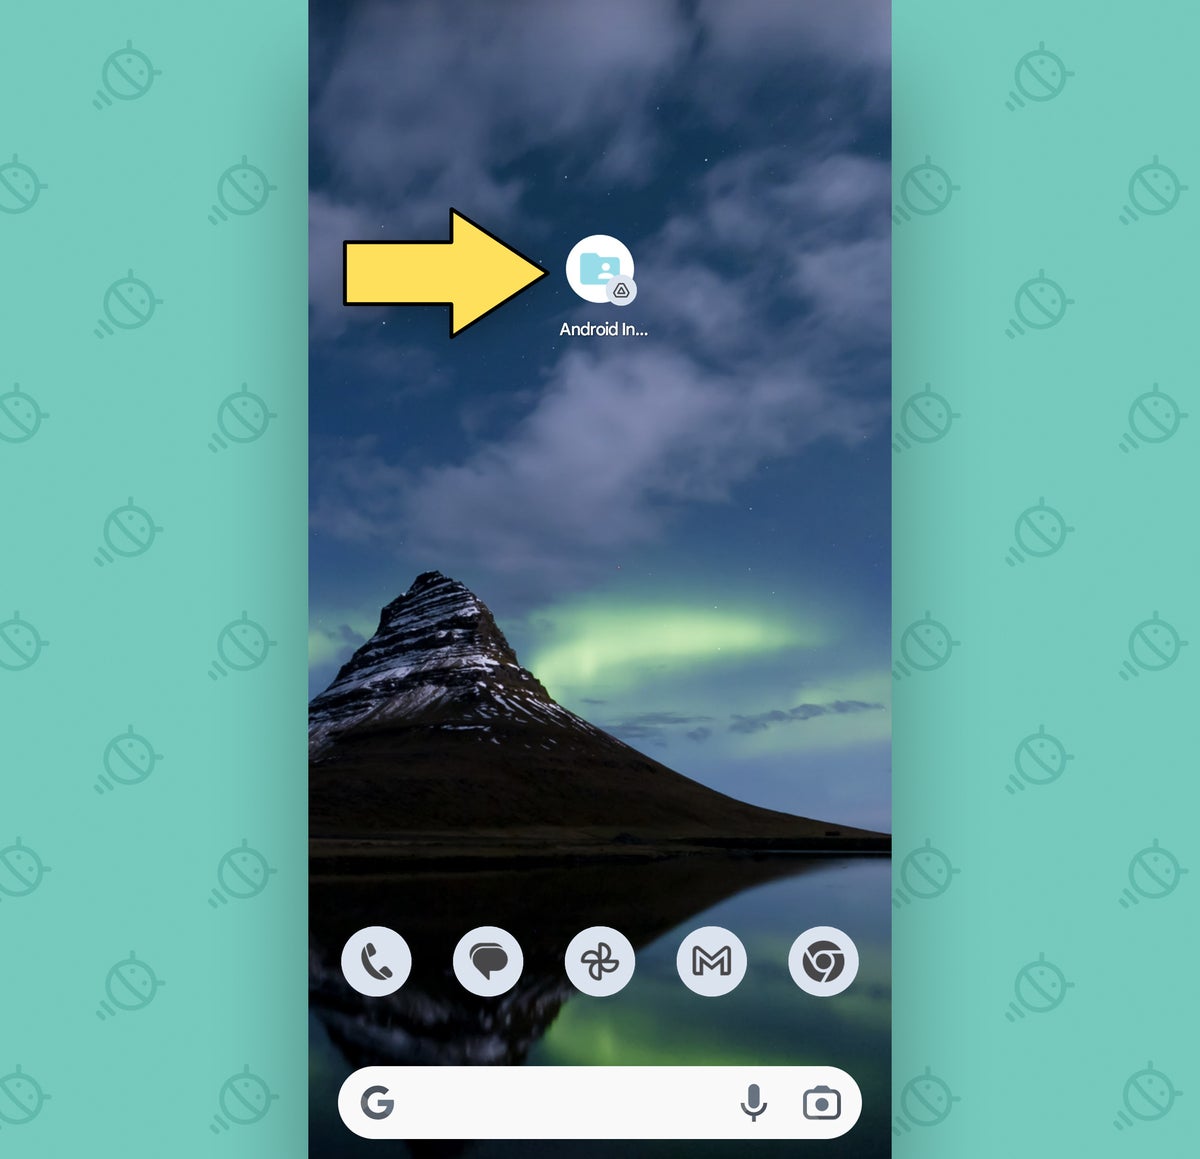 Android Shortcuts: Google Drive home screen